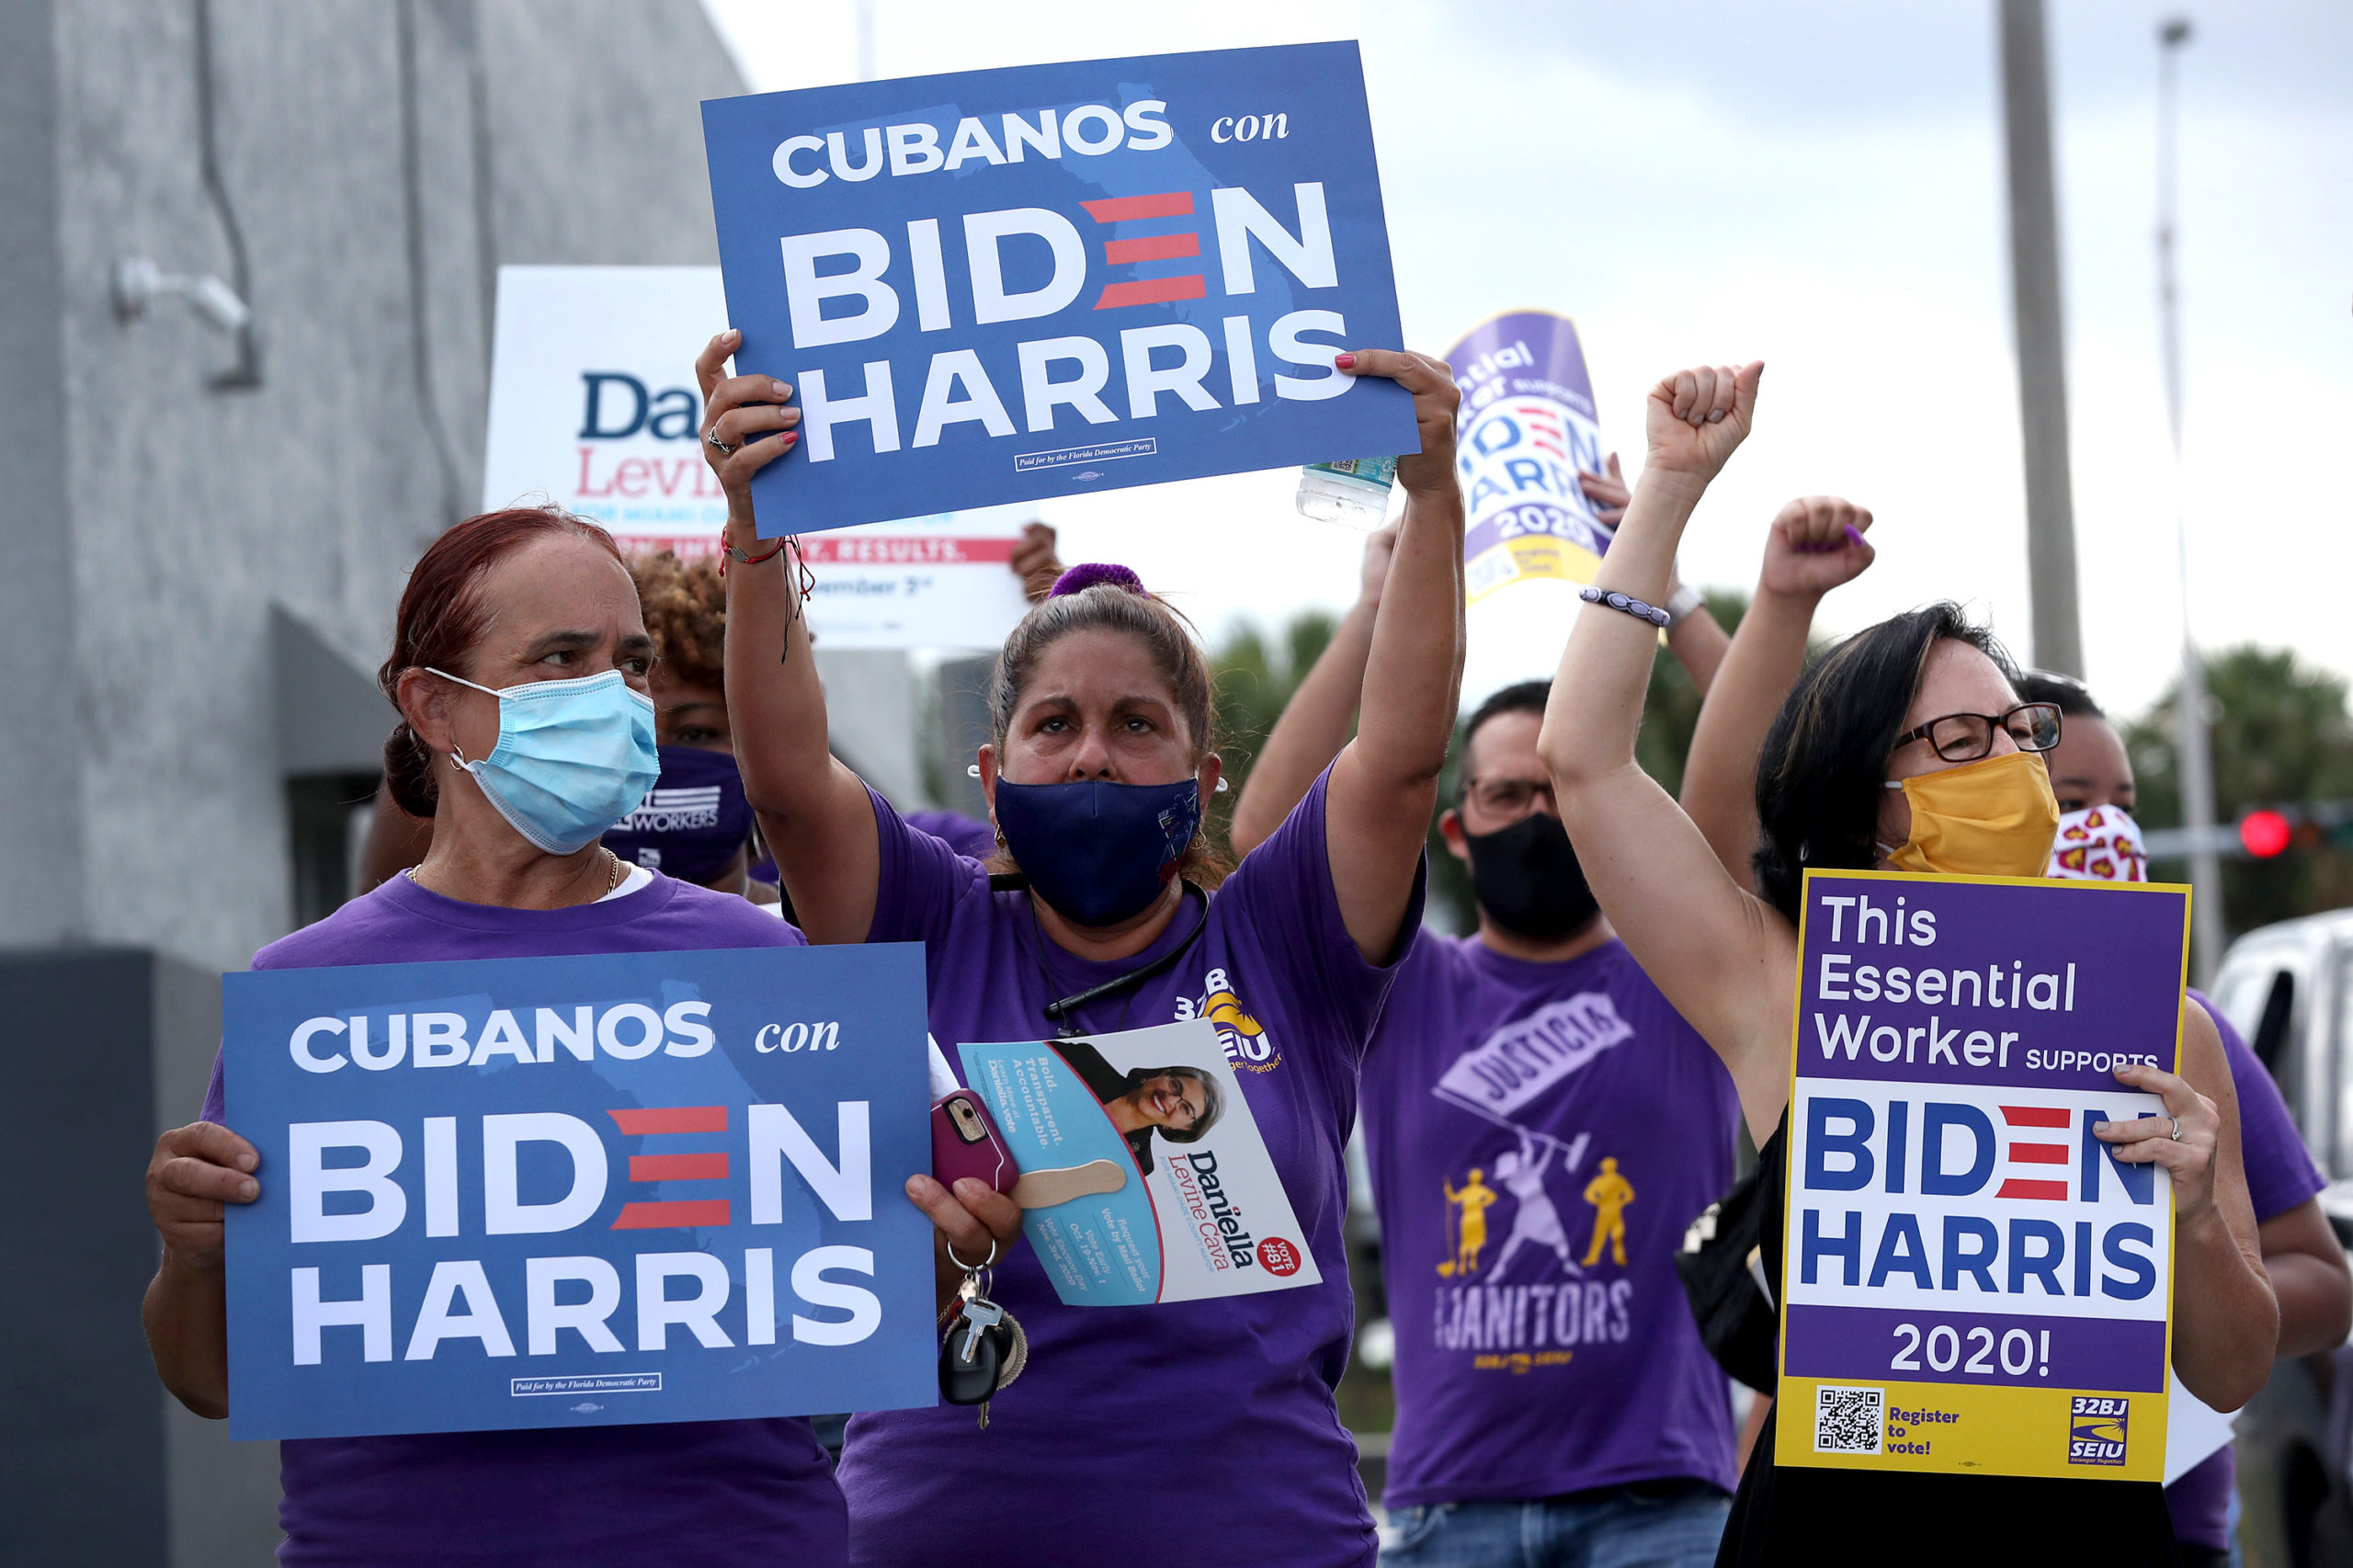 People, including SEIU members, show their support for Democratic presidential nominee Joe Biden on Oct. 11 in Miami Springs, Florida. (Joe Raedle/Getty Images)